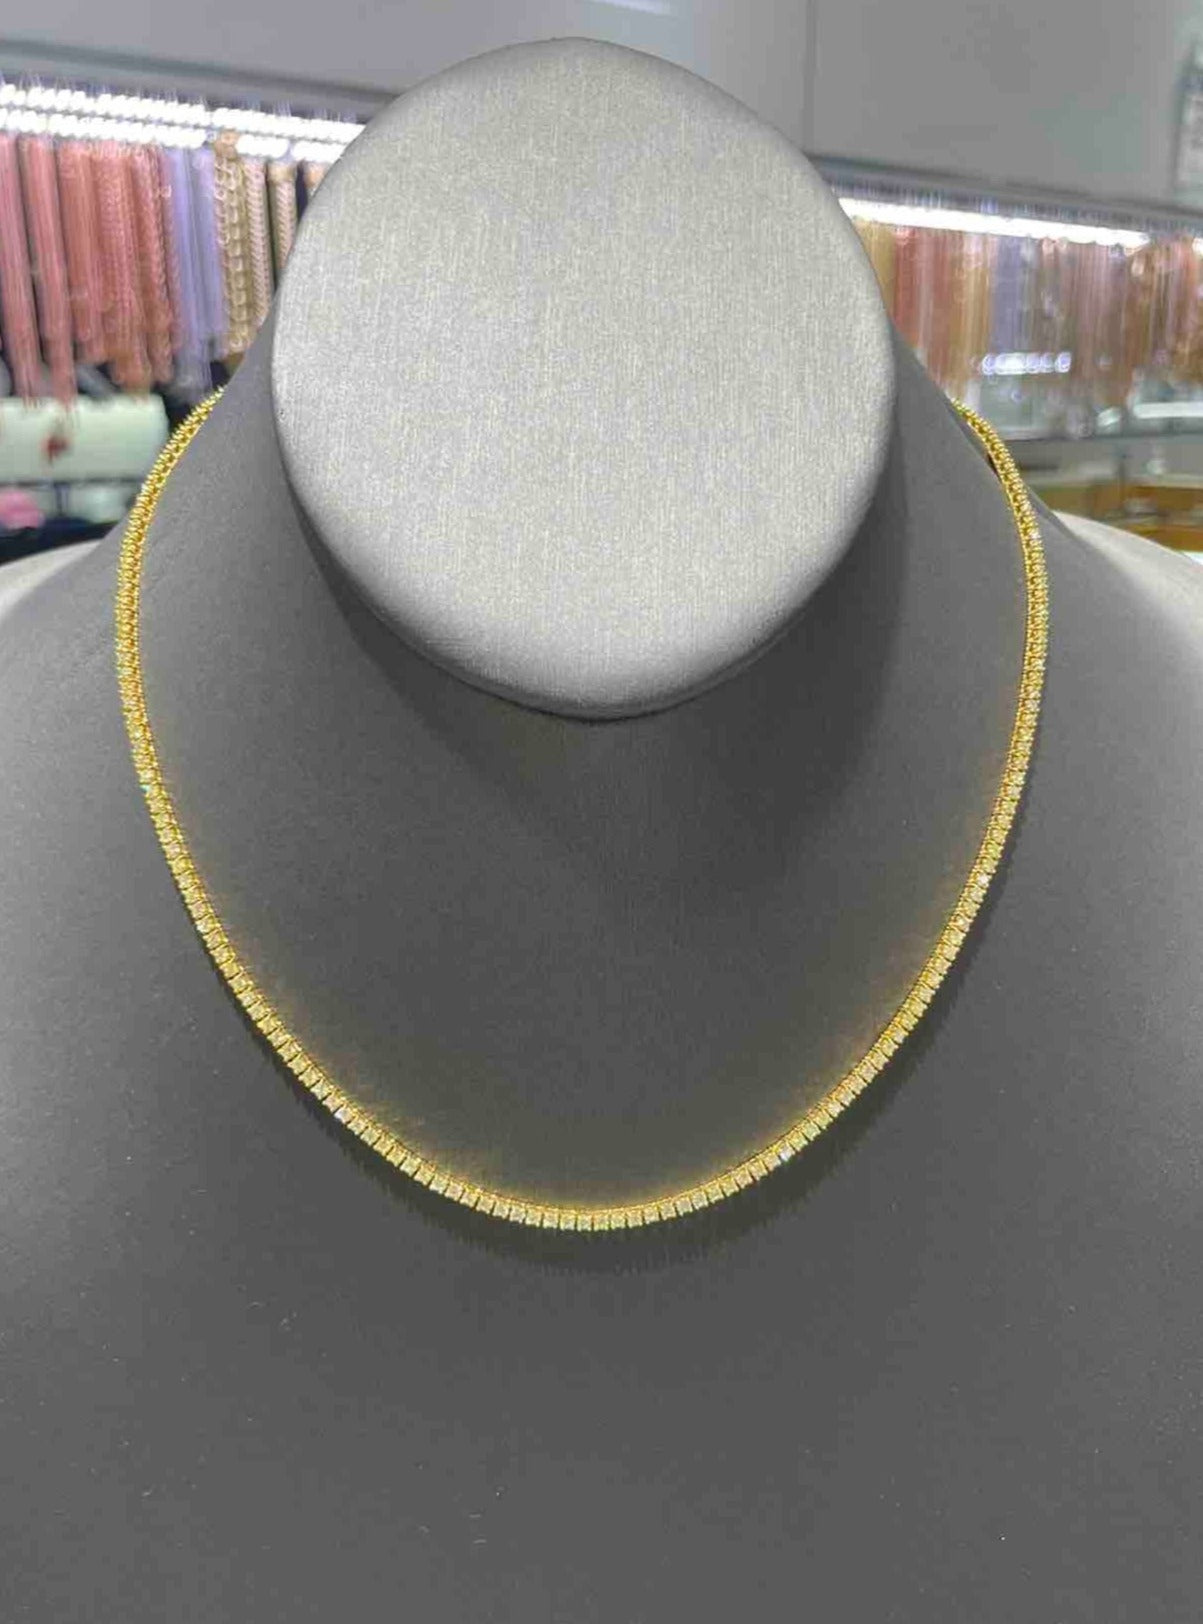 vs1 14k "bust down" tennis chain iced 6.32 cts natural diamonds t.w. yellow gold